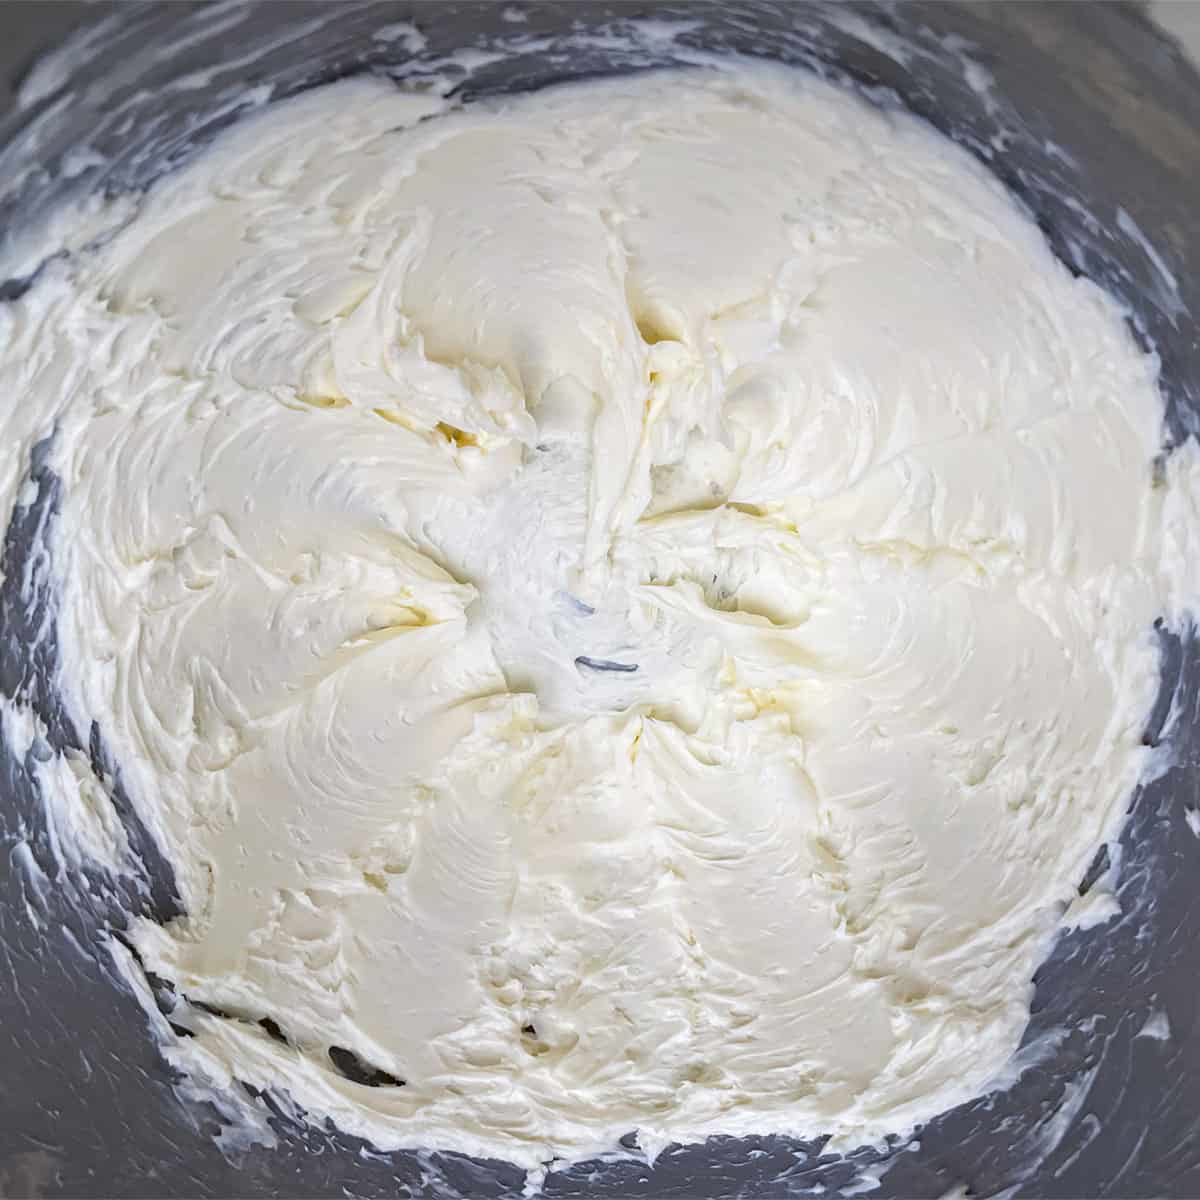 Butter that is mixed for two minutes and looks soft and creamy.